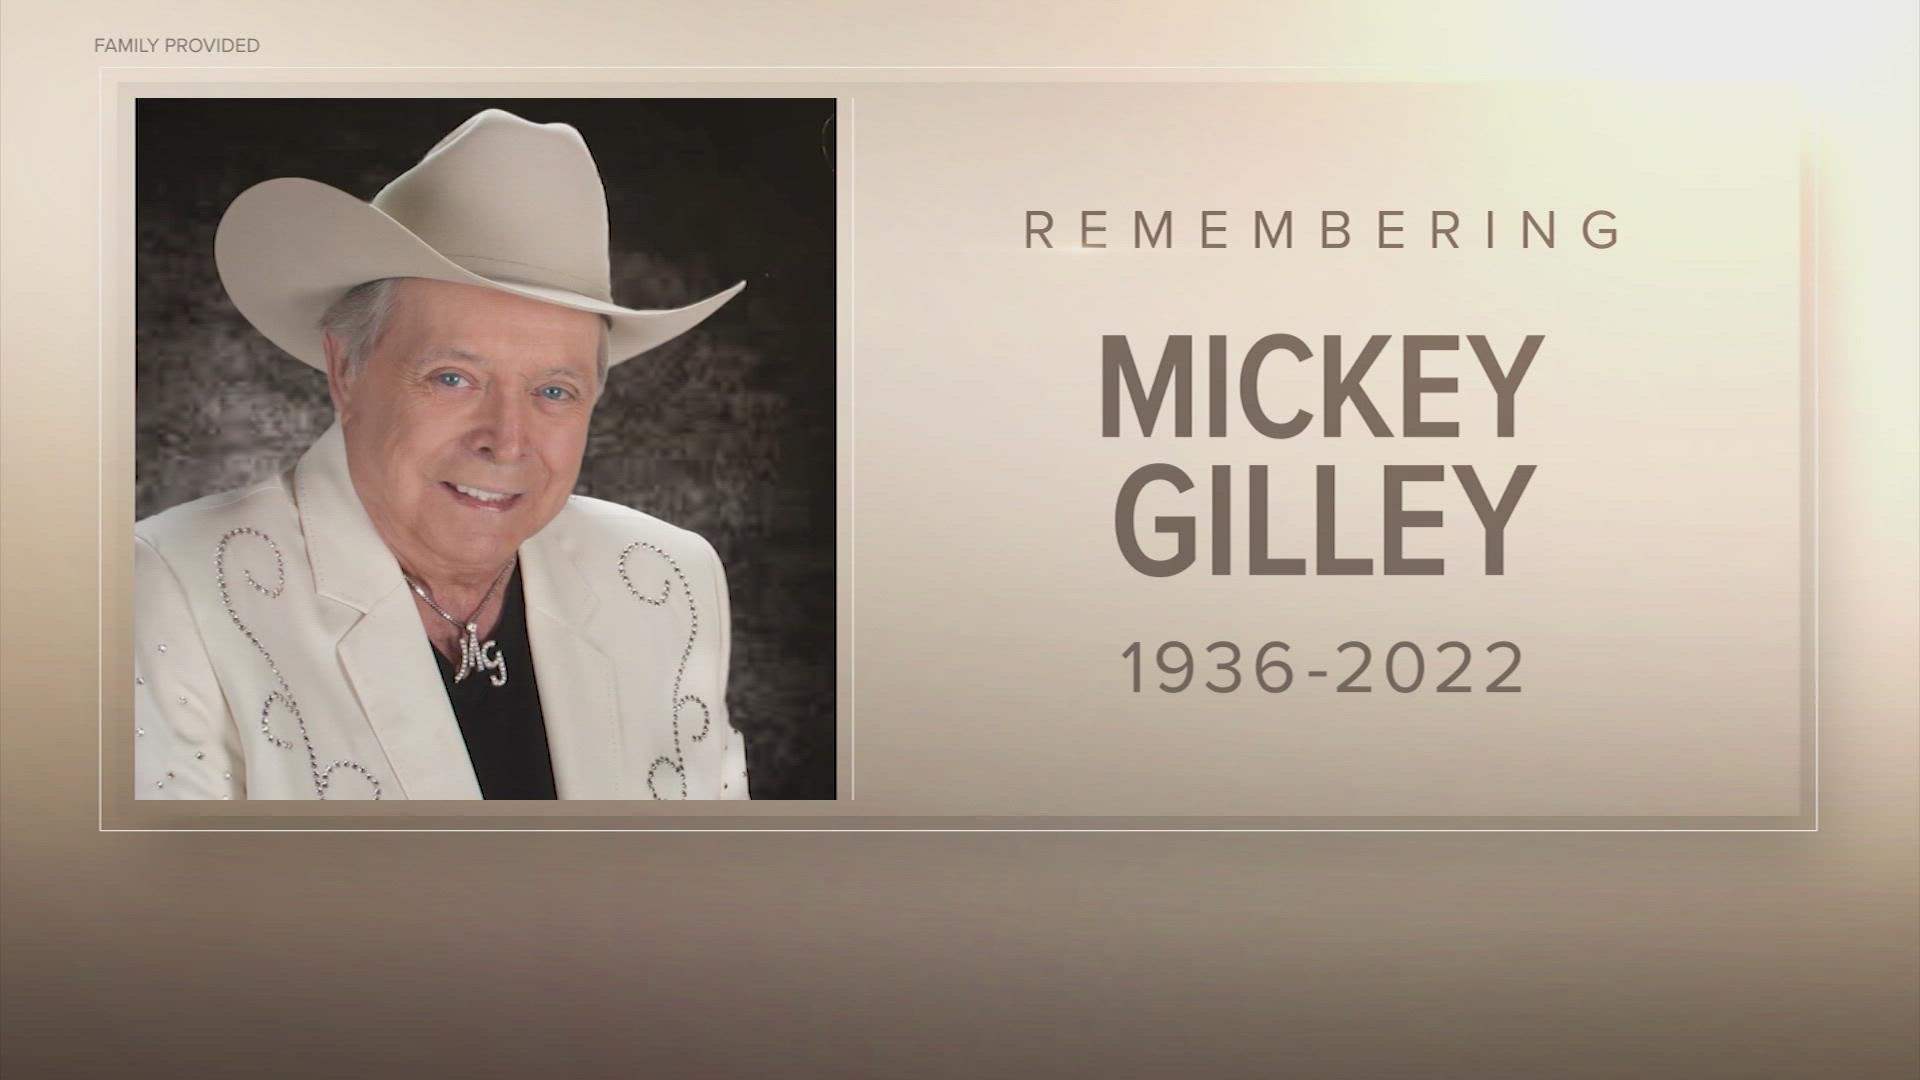 Country music legend Mickey Gilley died on Saturday surrounded by family and close friends. He was 86-years-old.